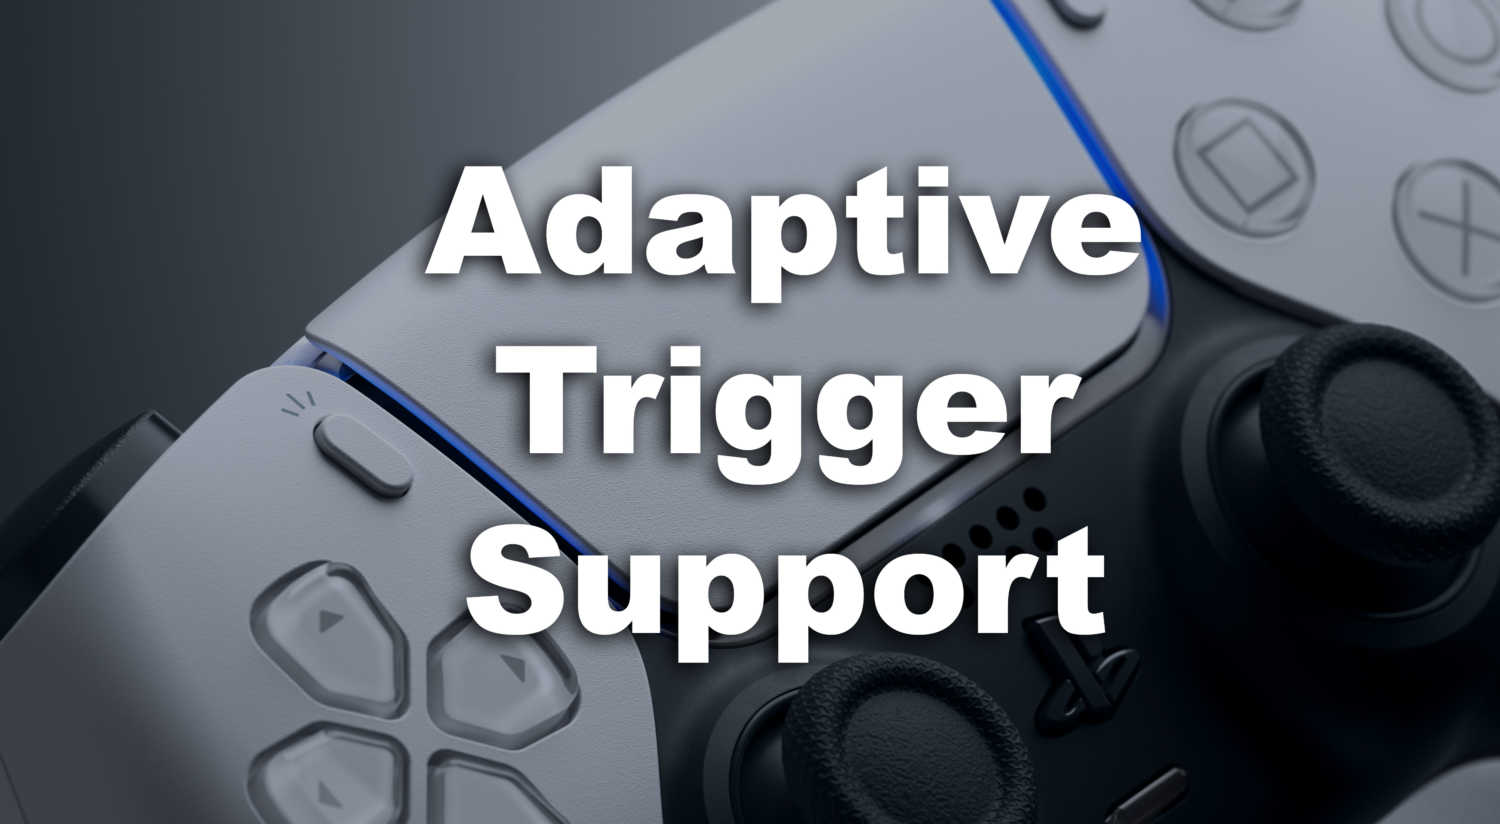 List of PS5 Games With Adaptive Trigger Support Image